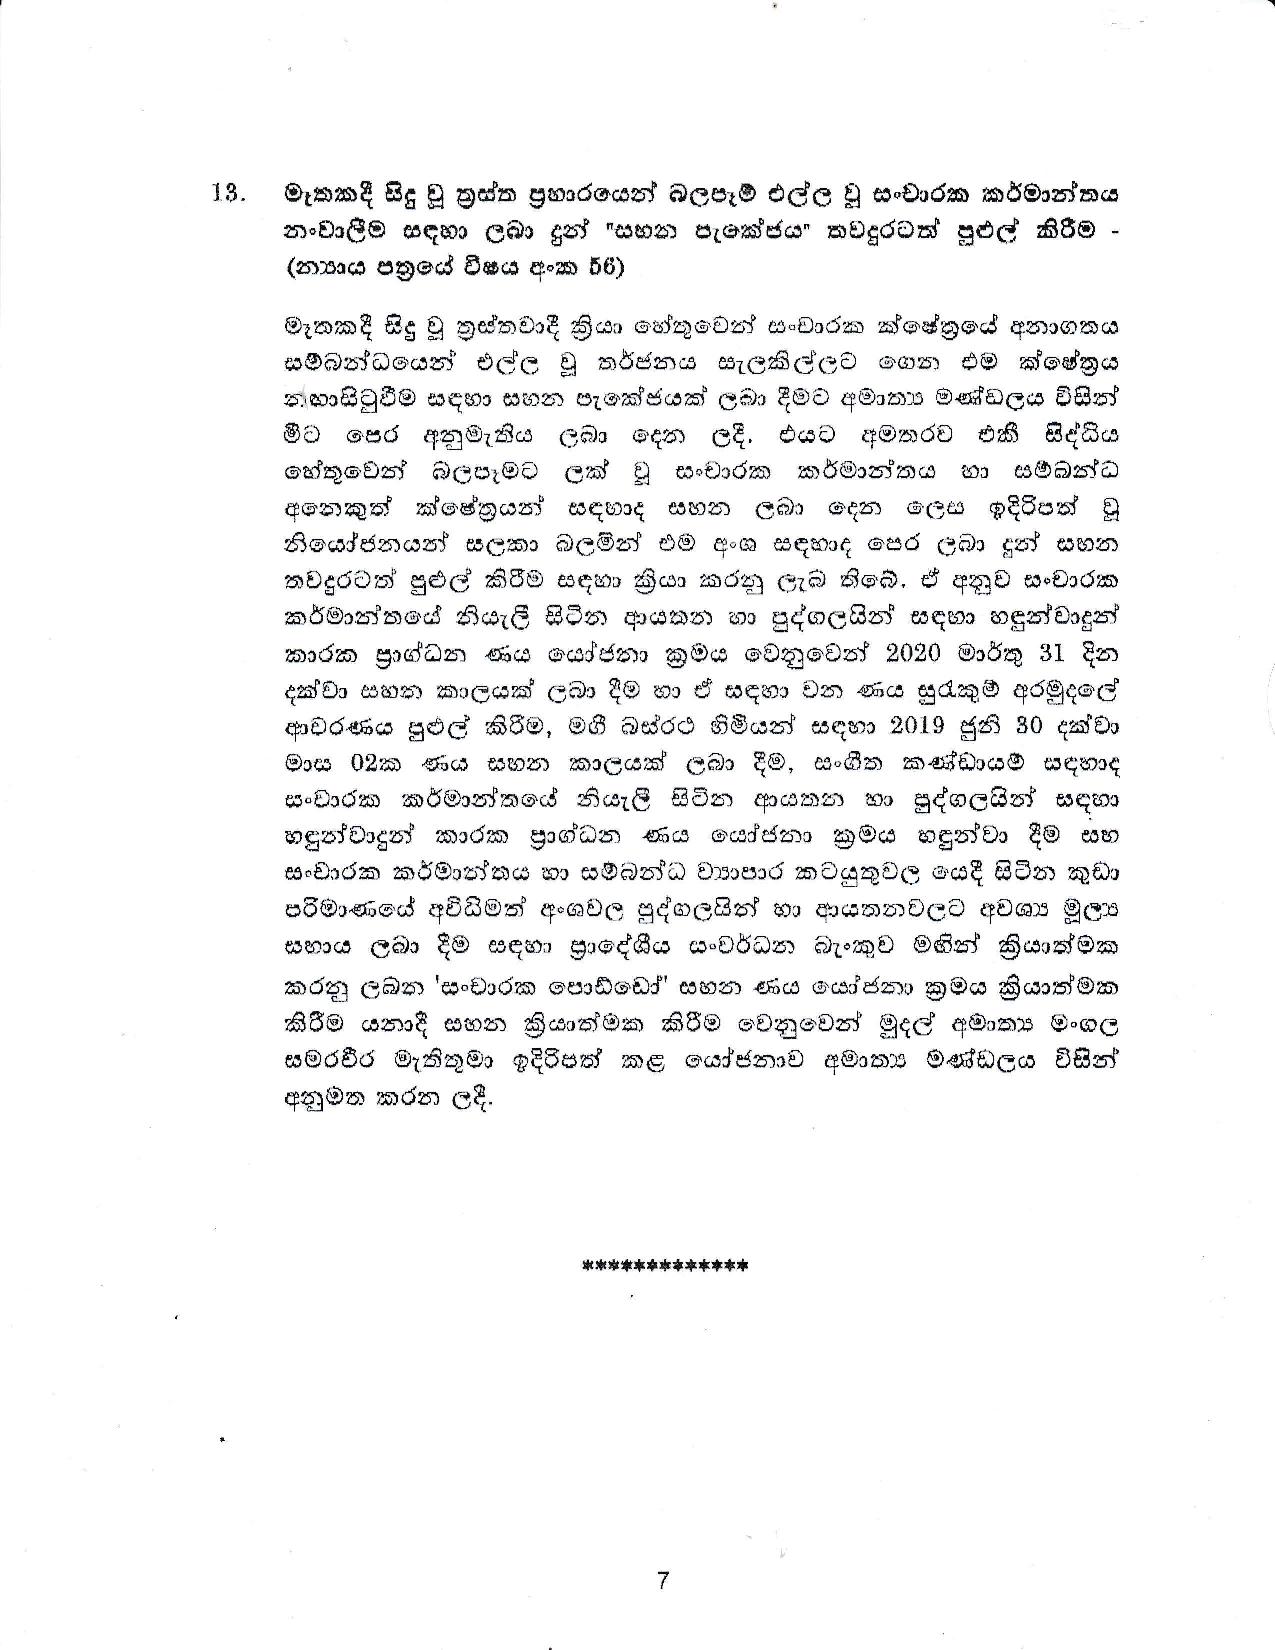 Cabinet Decision on 18.06.2019S page 007